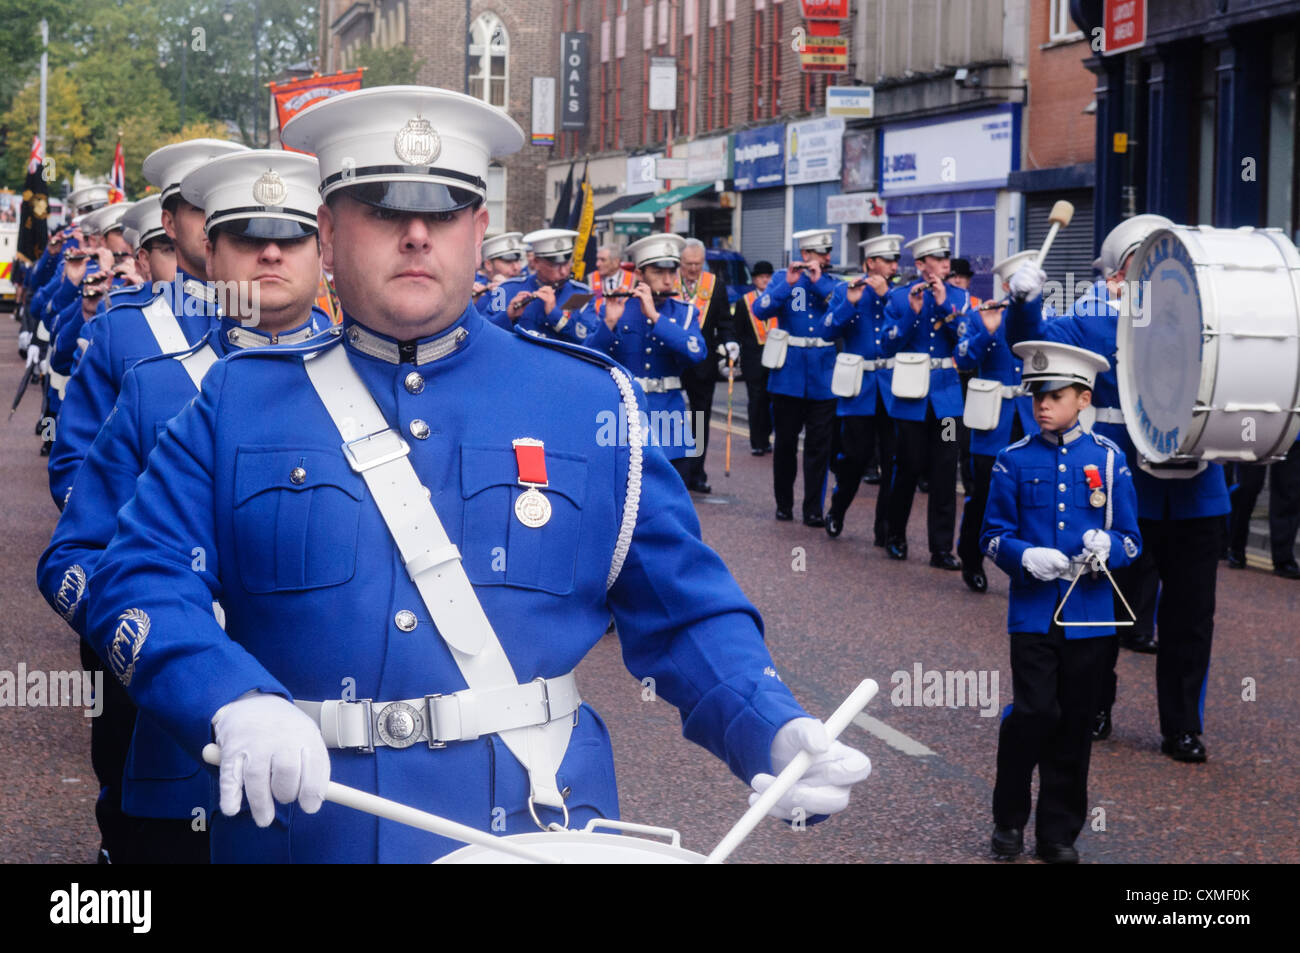 Millar Memorial Flute band marches on a road in Belfast during an Orange Order parade Stock Photo